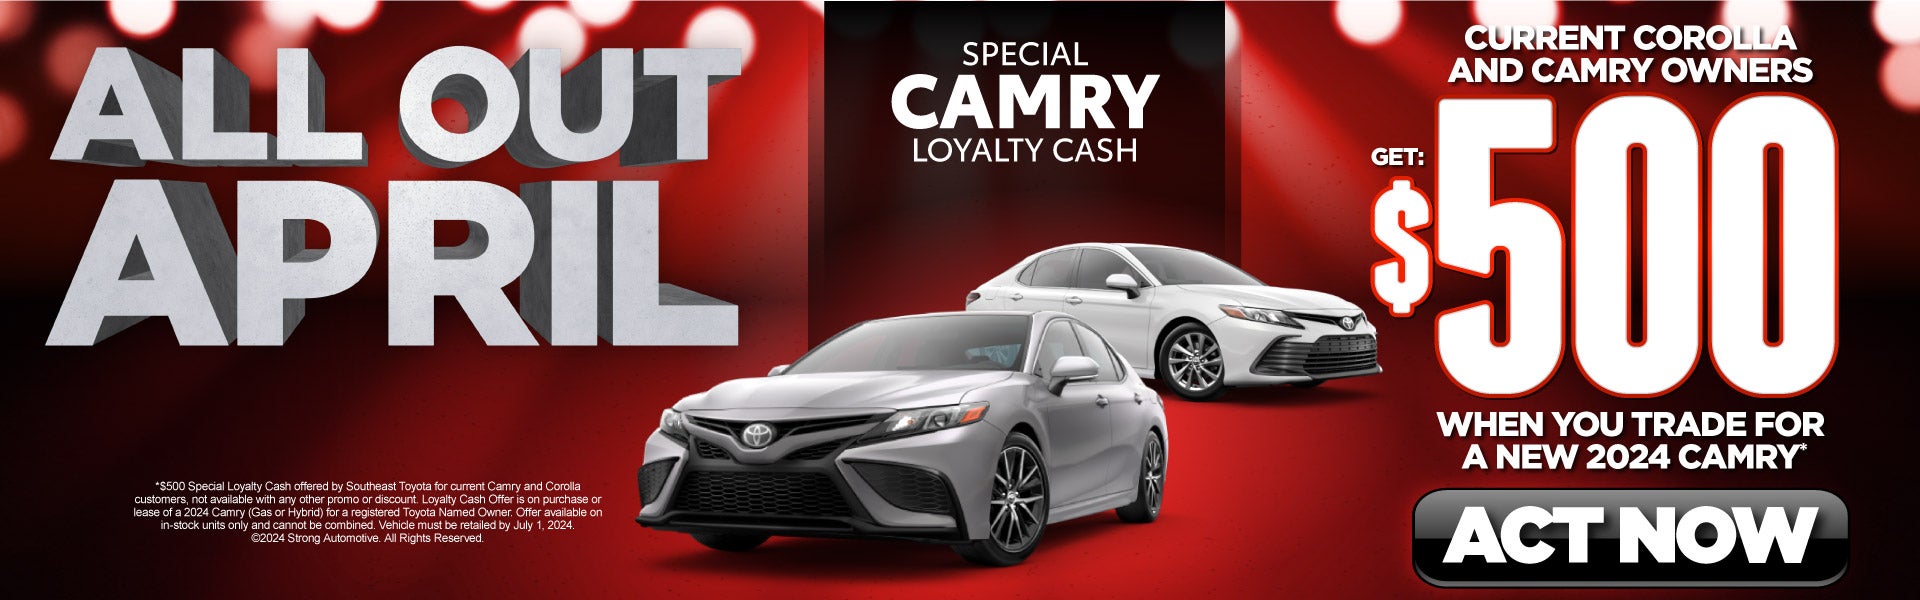 Special Camry Loyalty Cash*